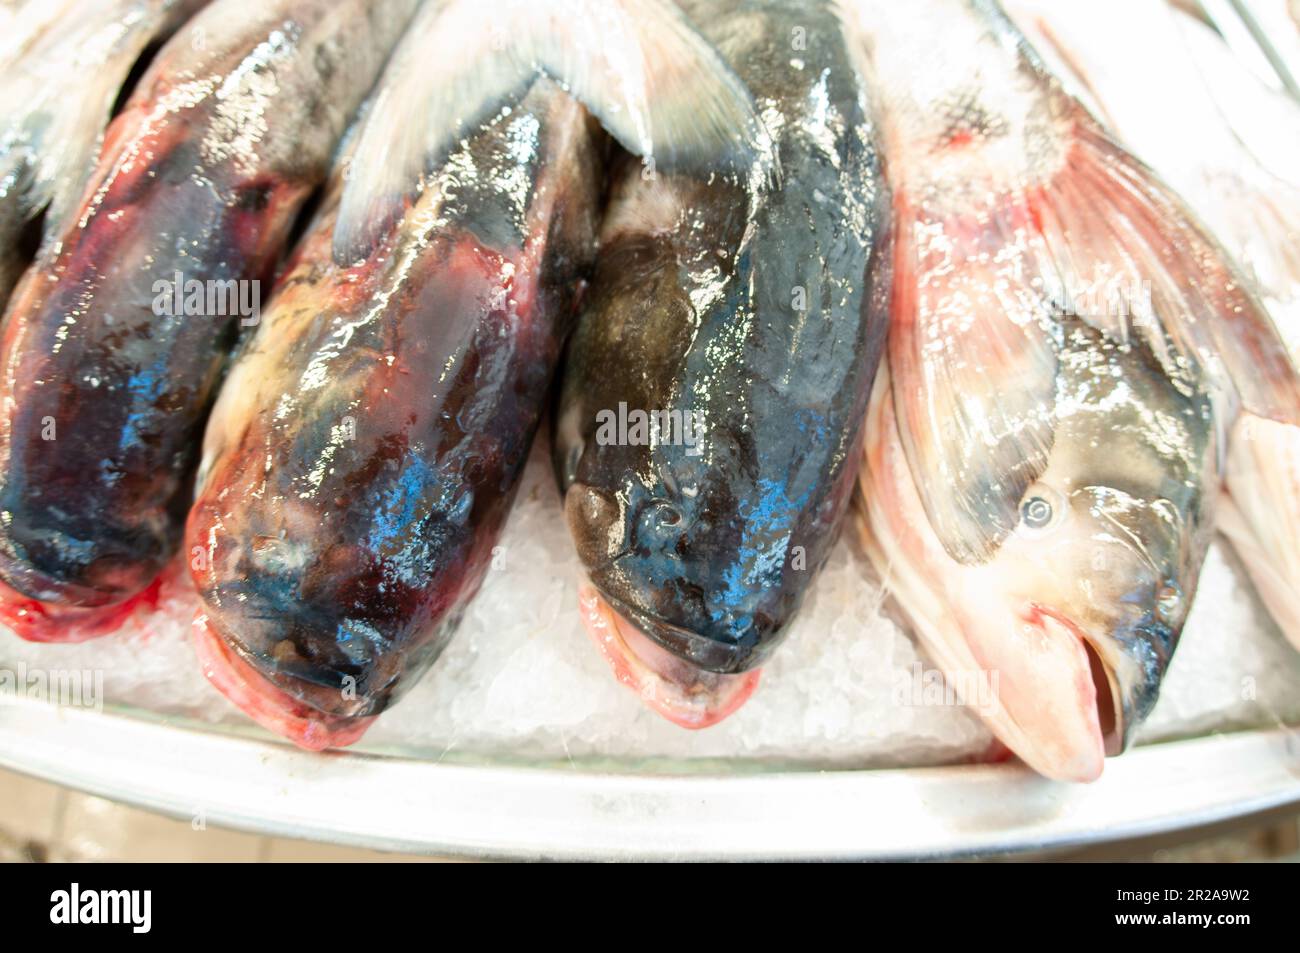 Fresh fish taken out of the aquarium to be sold in the fish market Stock Photo